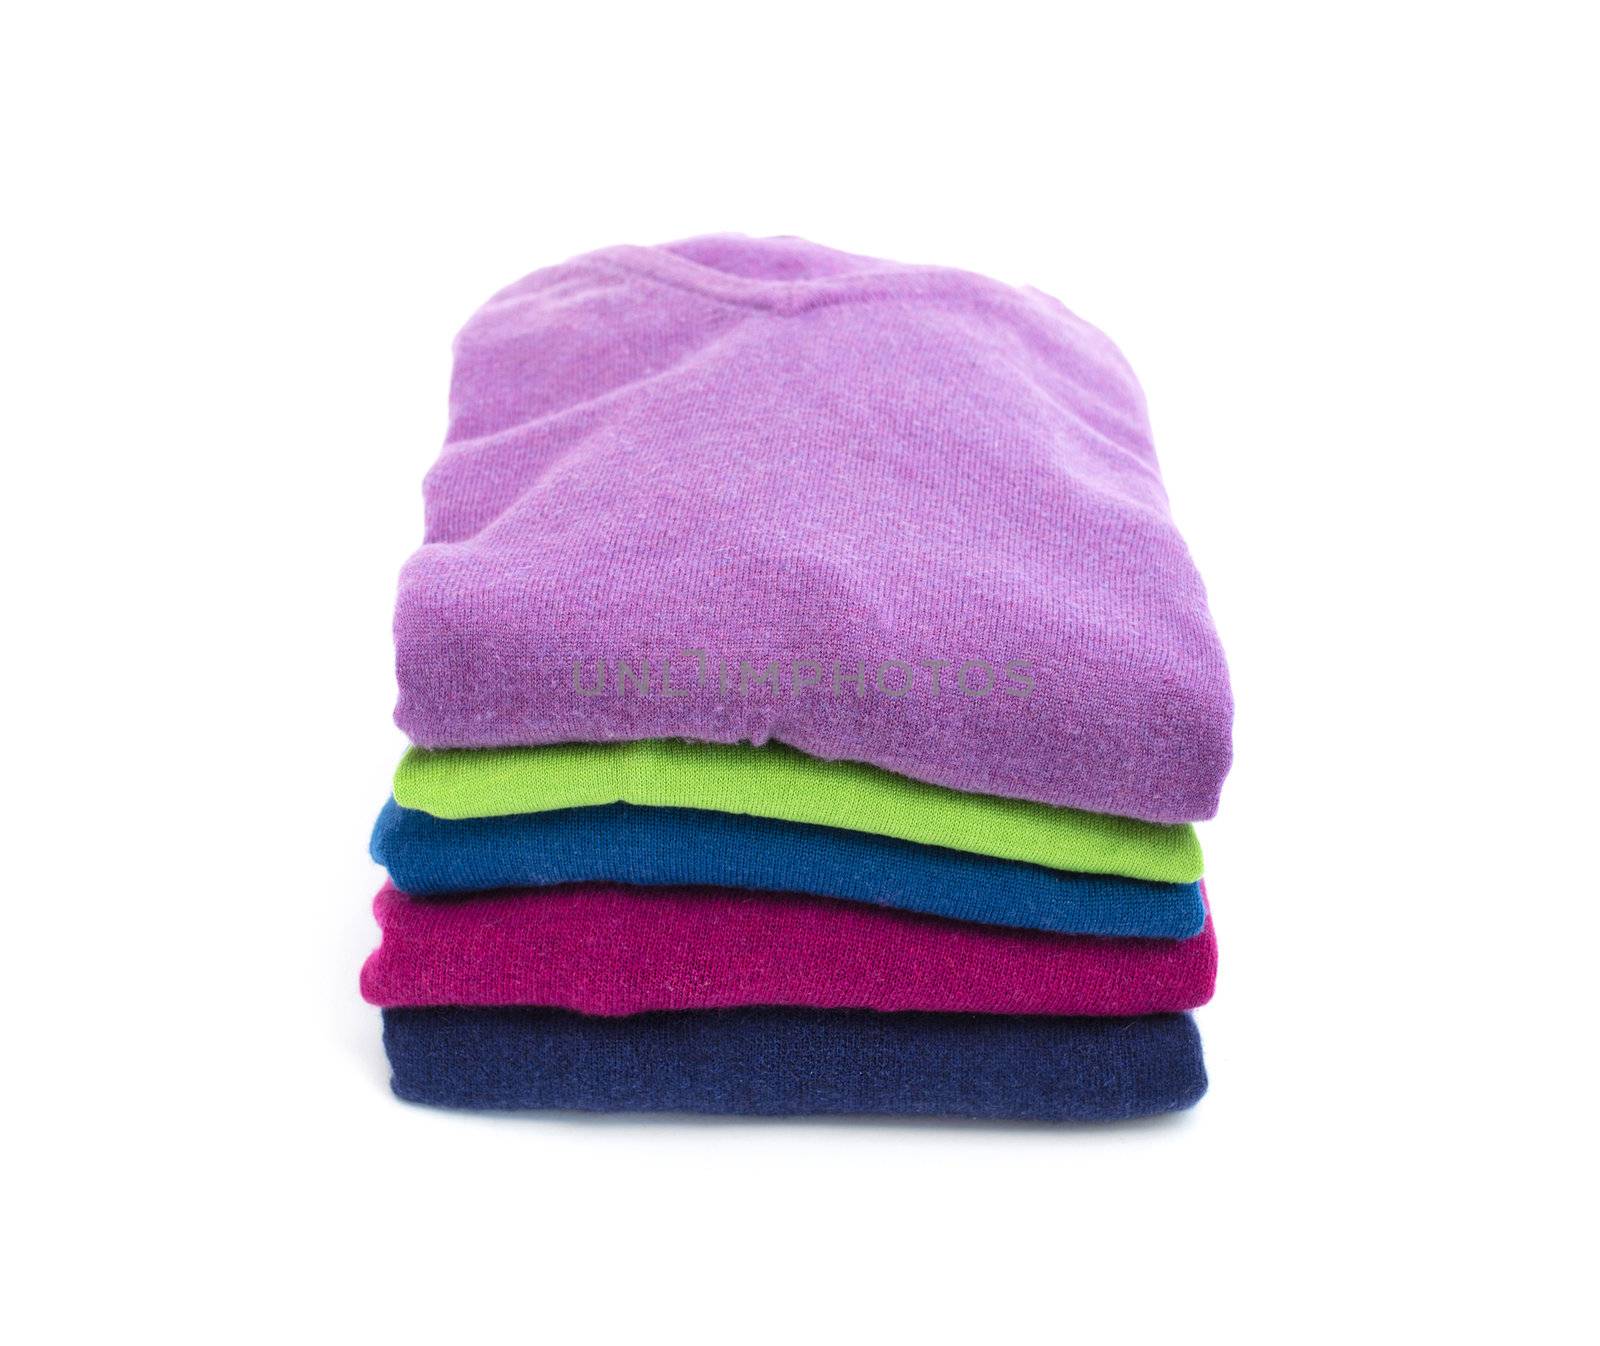 Stack of colorful wool or cashmere sweaters isolated on white